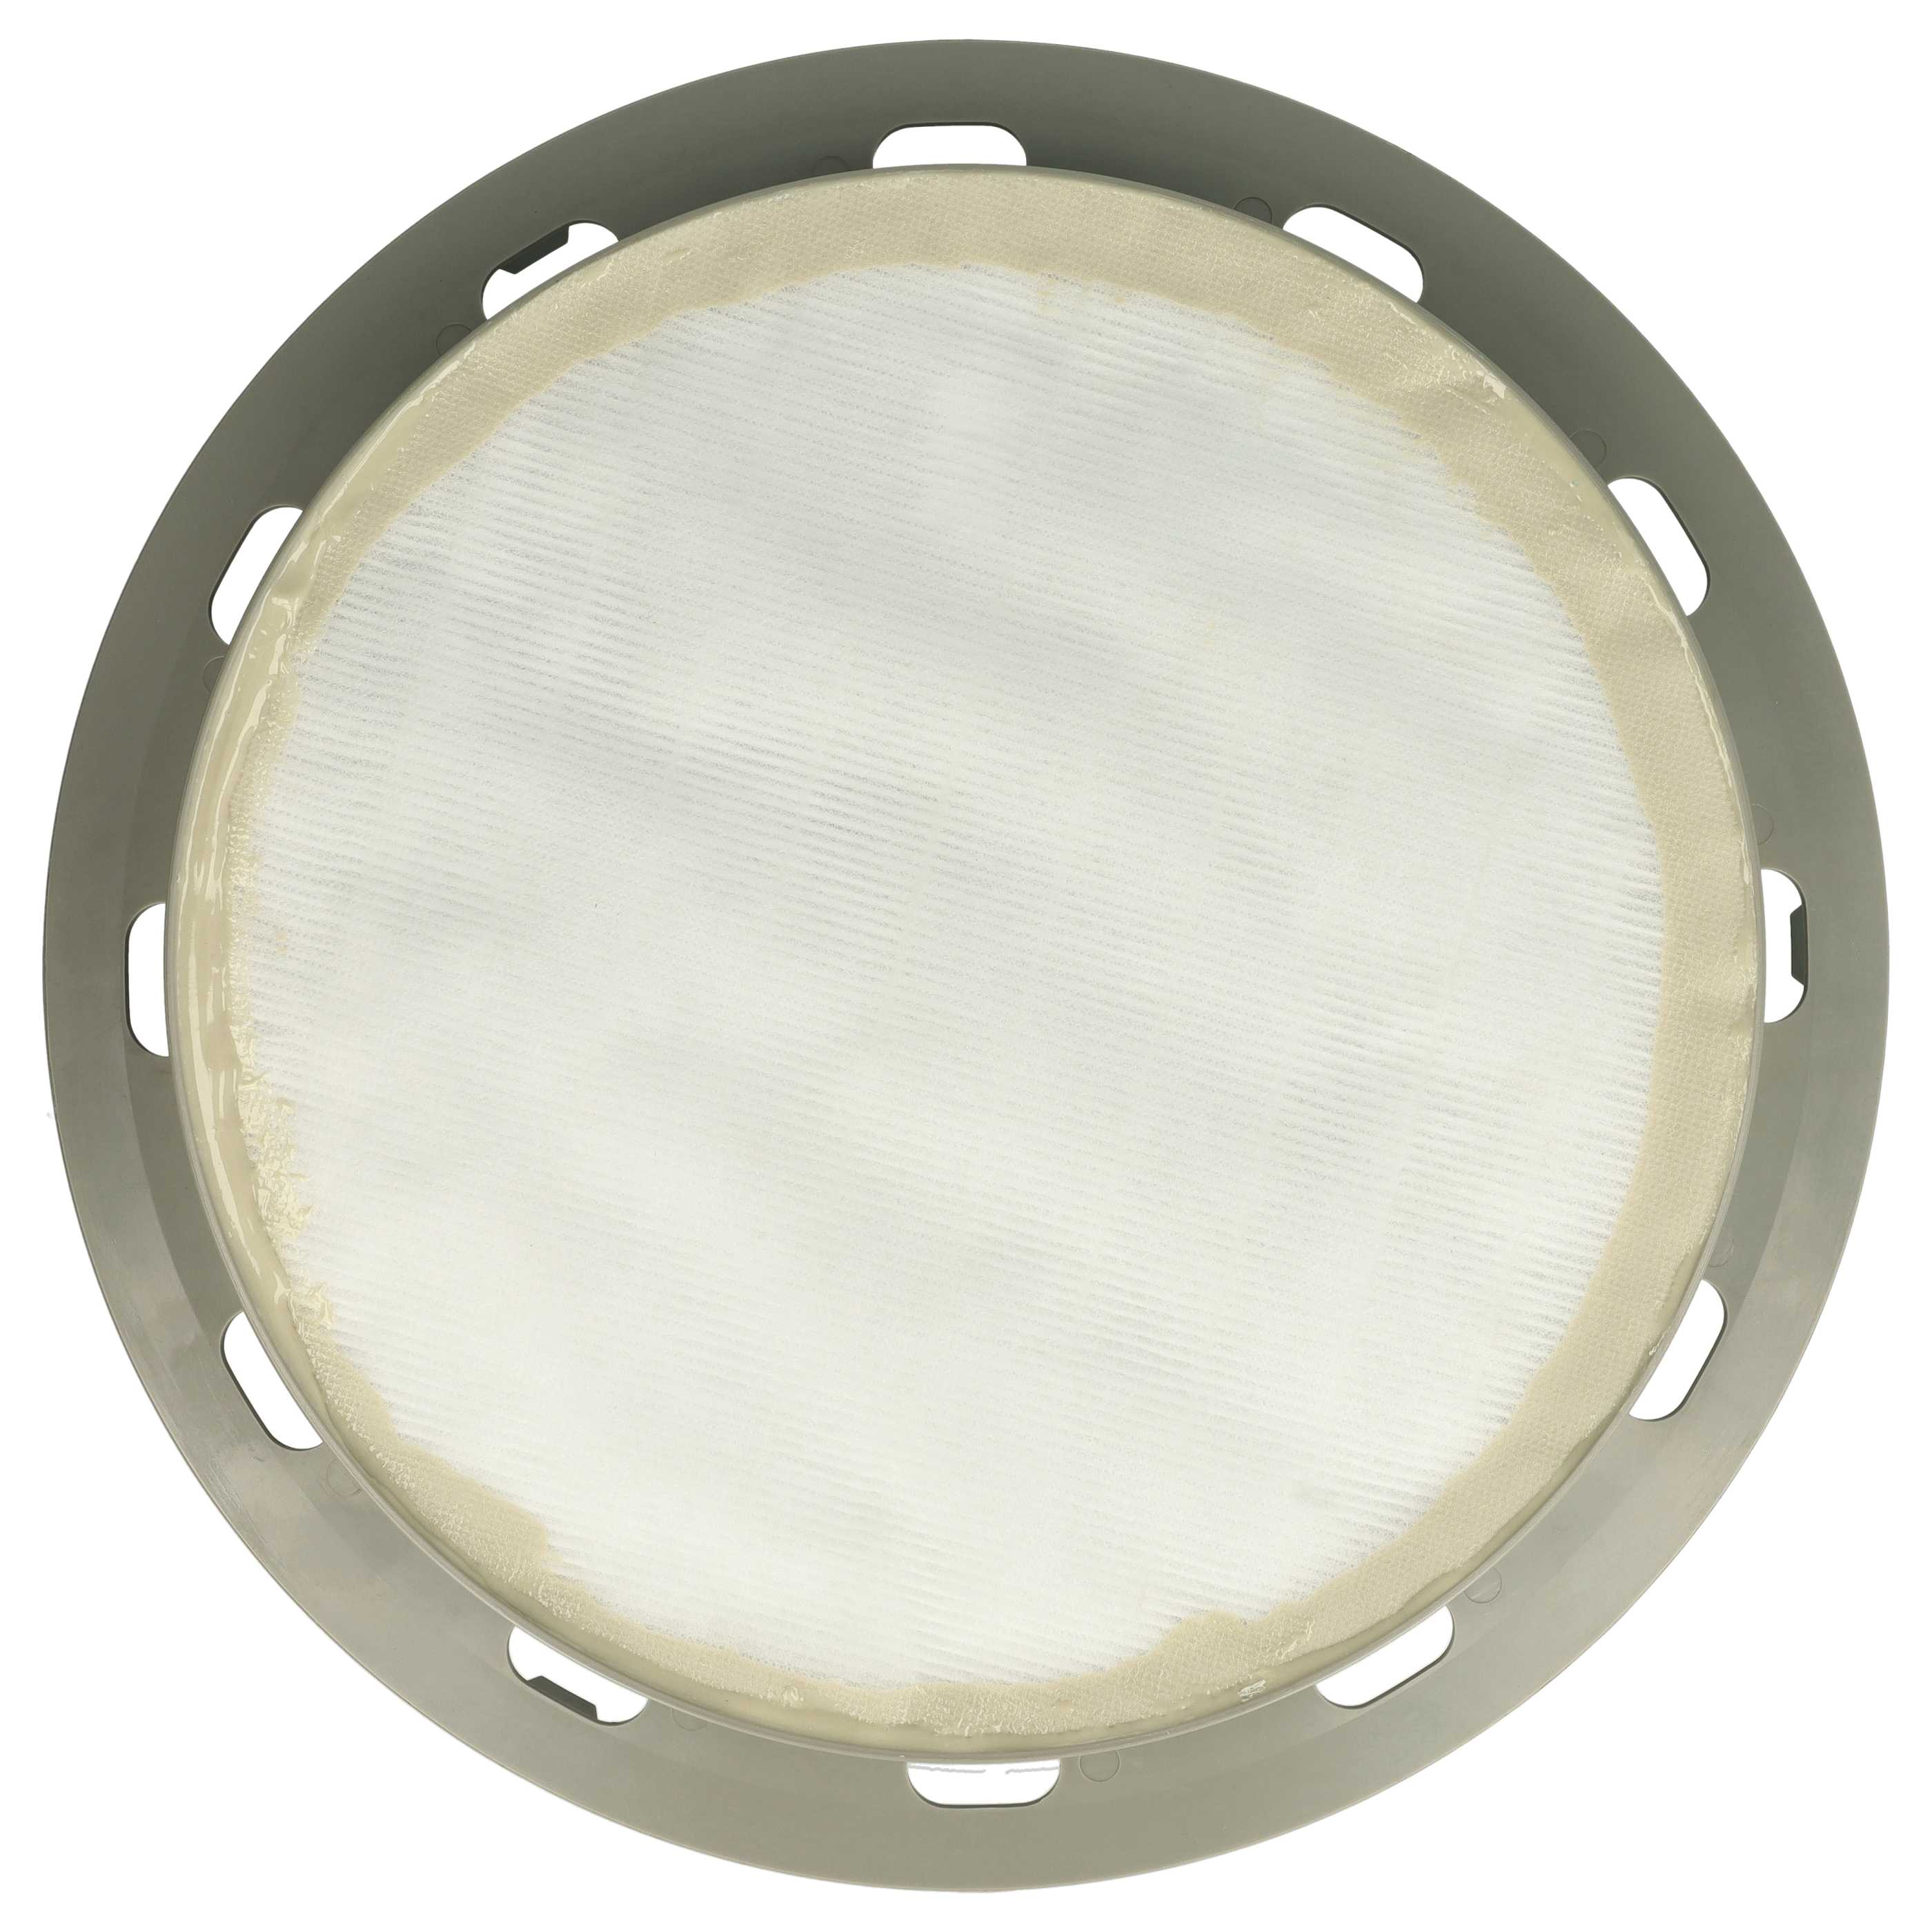 1x HEPA filter replaces Nilfisk Alto 1402666010, 140 2666 010 for Electrolux Vacuum Cleaner